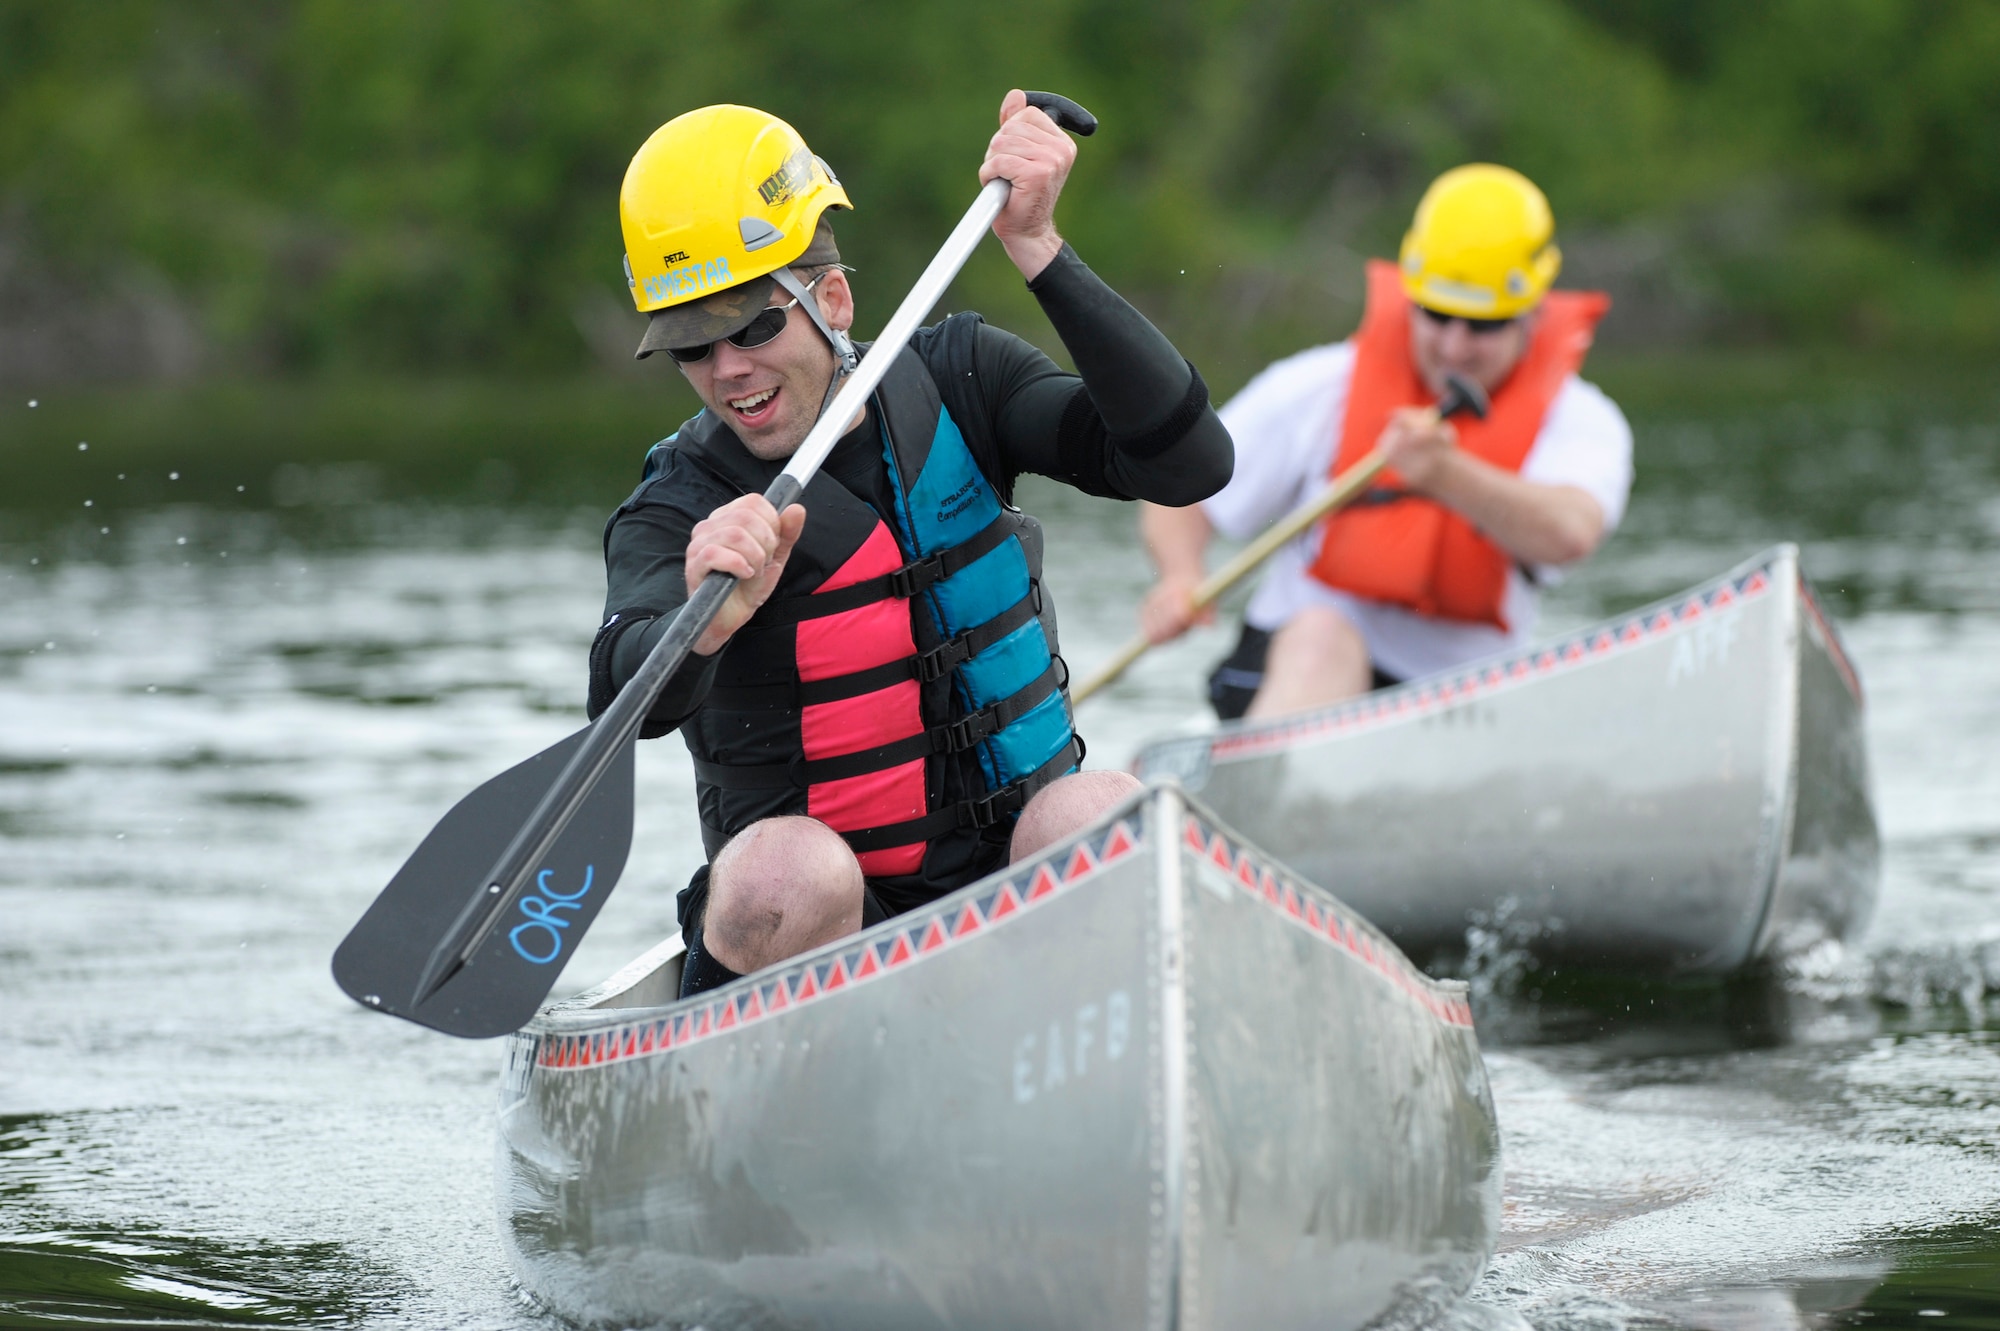 ELMENDORF AIR FORCE BASE, Alaska -- Senior Airmen Tyson Potter and Ryan Bollinger paddle their way to the finish line during the canoe race of the Arctic Warrior Olympics June 12. This year's canoe race course ran nearly 1,500 feet at Sixmile Lake here. Potter and Bollinger are members of 3rd Equipment Maintenance Squadron. (U.S. Air Force photo/Master Sgt. Keith Brown)